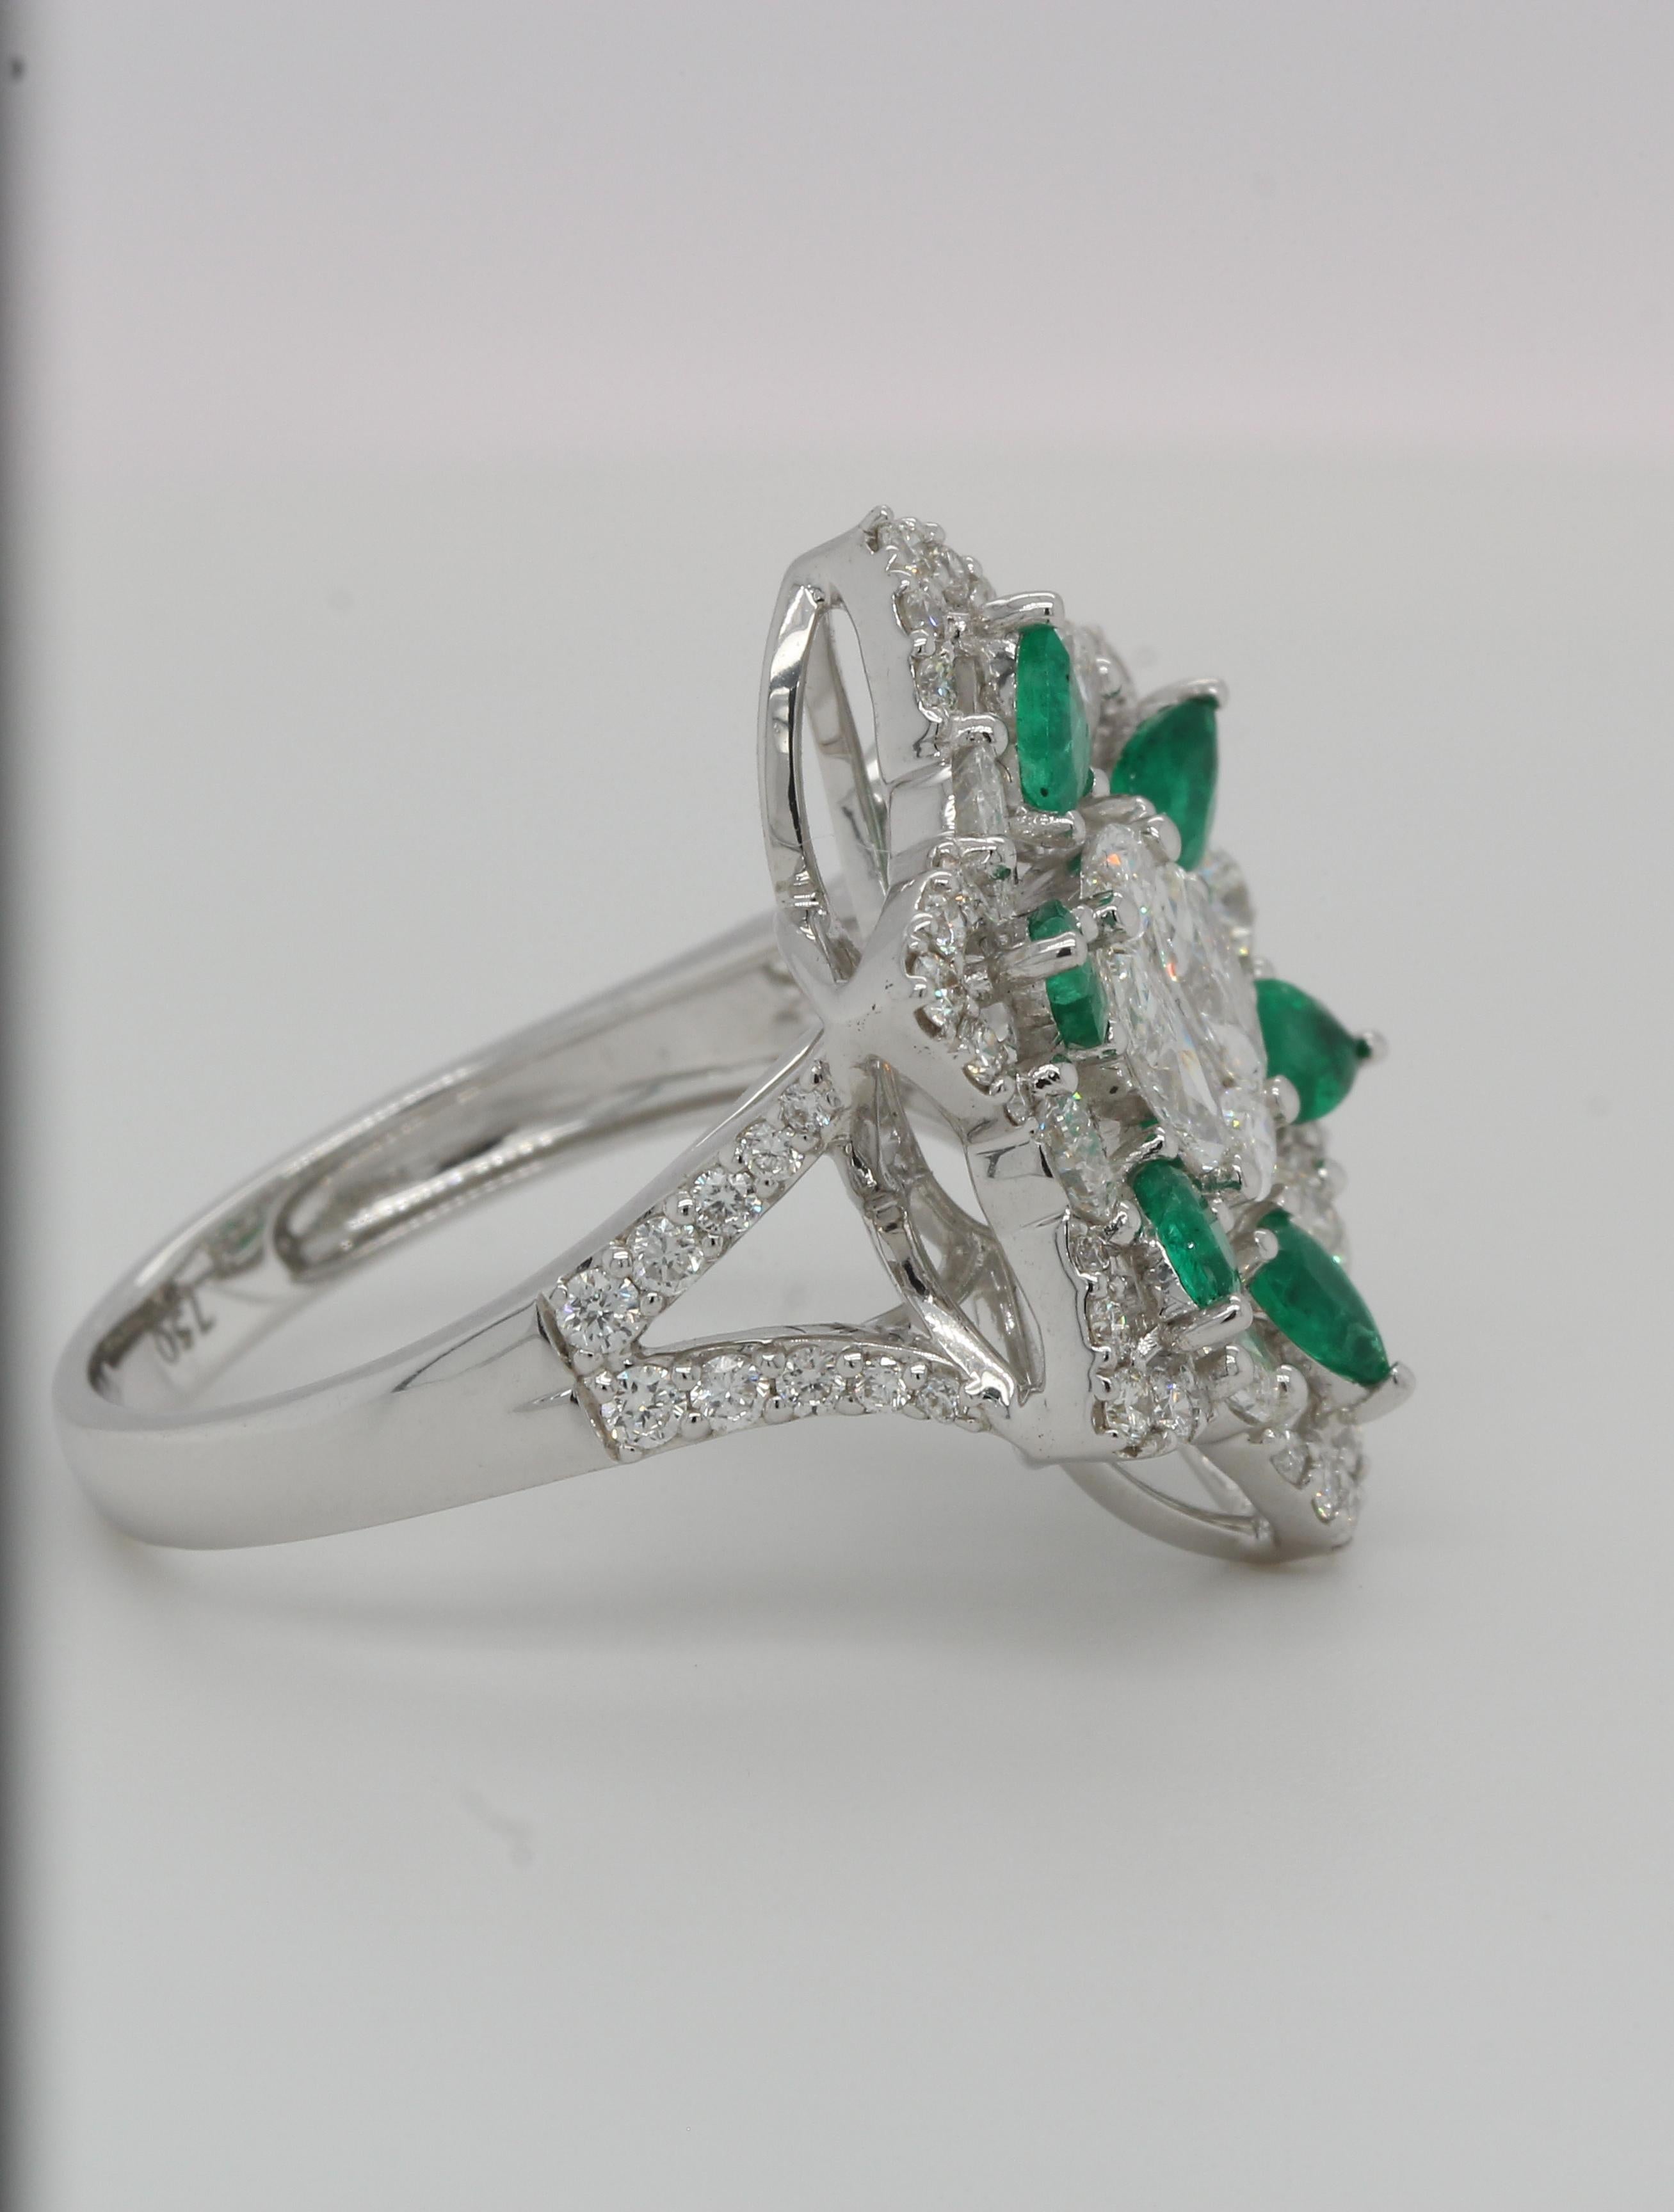 A brand new emerald and diamond ring in 18K gold. By creating an illusion of diamond in the center so it seems to be one piece, and emerald pears weighing 0.74 carats are positioned around it. It has 1.96 carats of diamonds in various shapes. This